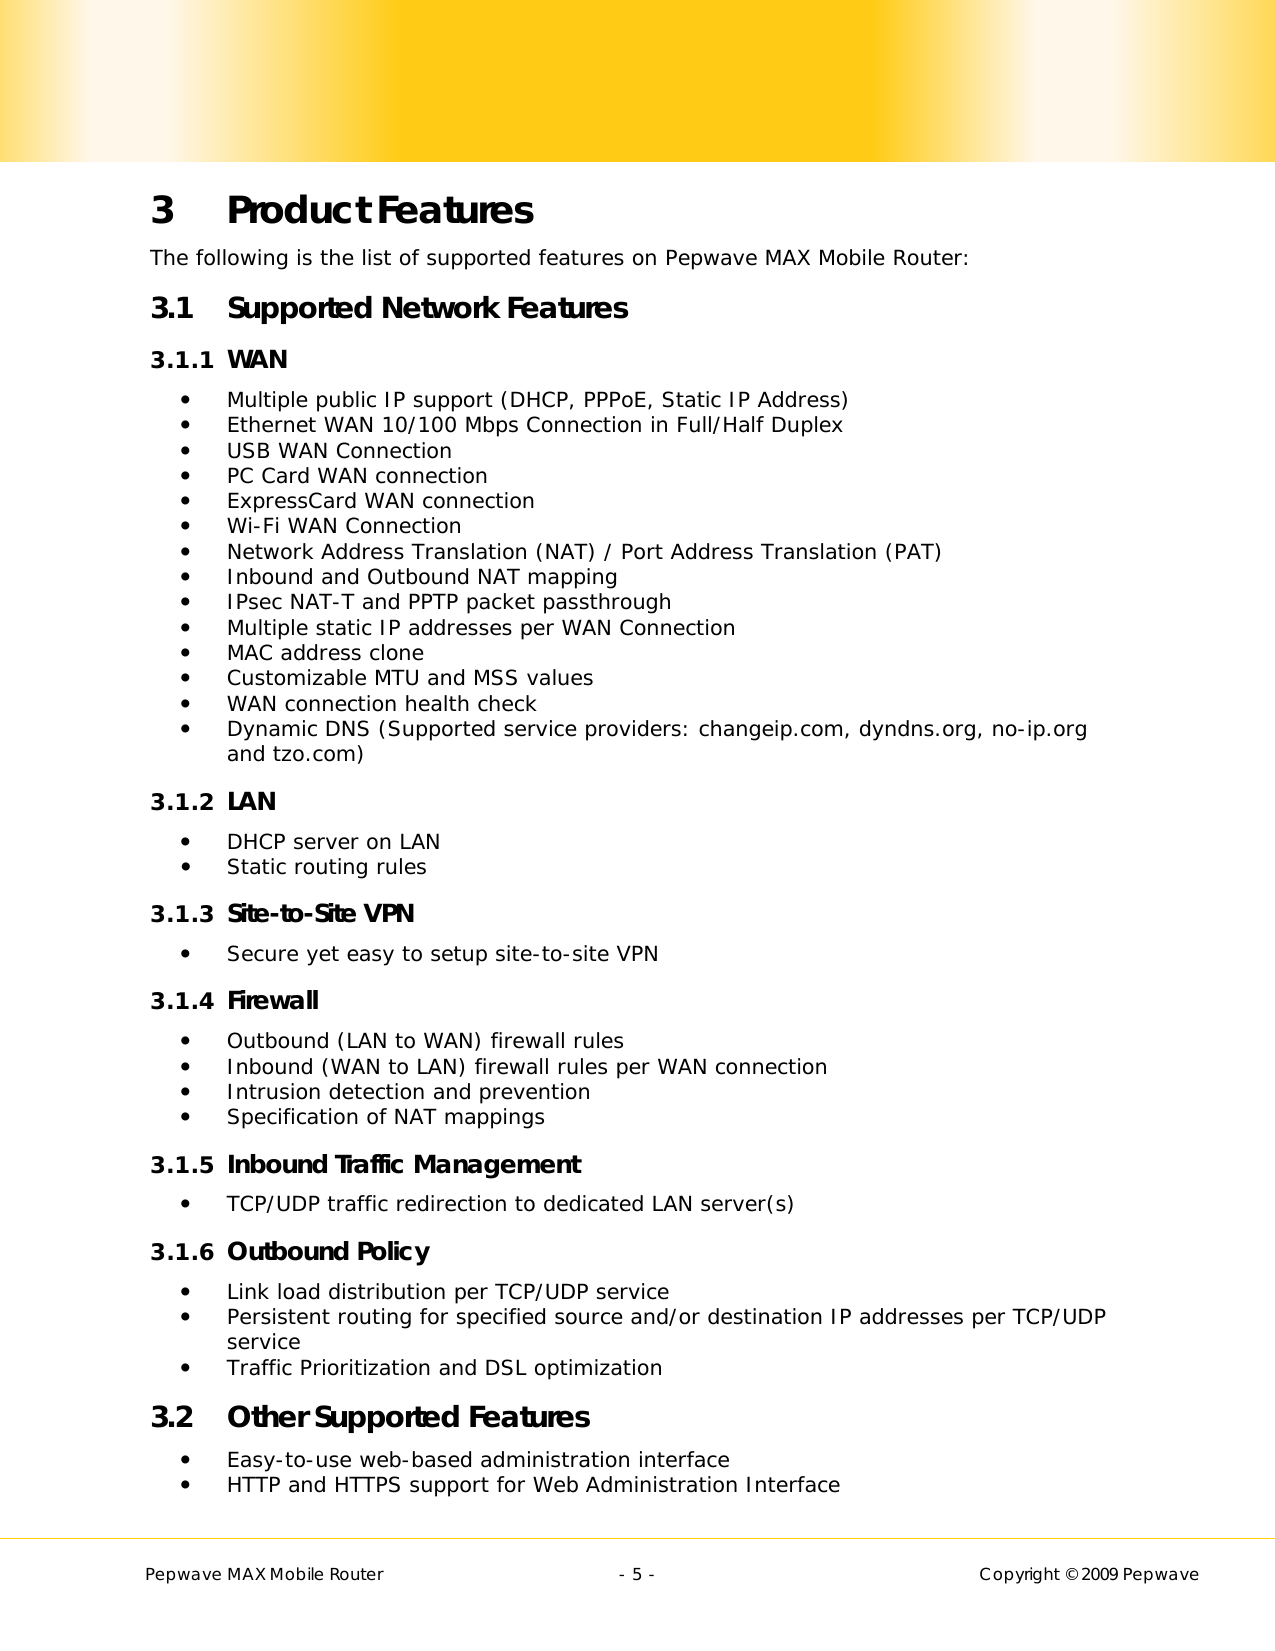        Pepwave MAX Mobile Router    - 5 -   Copyright © 2009 Pepwave 3 Product Features The following is the list of supported features on Pepwave MAX Mobile Router: 3.1 Supported Network Features 3.1.1 WAN  Multiple public IP support (DHCP, PPPoE, Static IP Address)  Ethernet WAN 10/100 Mbps Connection in Full/Half Duplex    USB WAN Connection   PC Card WAN connection  ExpressCard WAN connection  Wi-Fi WAN Connection  Network Address Translation (NAT) / Port Address Translation (PAT)  Inbound and Outbound NAT mapping  IPsec NAT-T and PPTP packet passthrough  Multiple static IP addresses per WAN Connection  MAC address clone  Customizable MTU and MSS values  WAN connection health check  Dynamic DNS (Supported service providers: changeip.com, dyndns.org, no-ip.org and tzo.com) 3.1.2 LAN  DHCP server on LAN  Static routing rules 3.1.3 Site-to-Site VPN  Secure yet easy to setup site-to-site VPN  3.1.4 Firewall  Outbound (LAN to WAN) firewall rules  Inbound (WAN to LAN) firewall rules per WAN connection  Intrusion detection and prevention  Specification of NAT mappings 3.1.5 Inbound Traffic Management  TCP/UDP traffic redirection to dedicated LAN server(s) 3.1.6 Outbound Policy  Link load distribution per TCP/UDP service   Persistent routing for specified source and/or destination IP addresses per TCP/UDP service  Traffic Prioritization and DSL optimization  3.2 Other Supported Features  Easy-to-use web-based administration interface  HTTP and HTTPS support for Web Administration Interface 